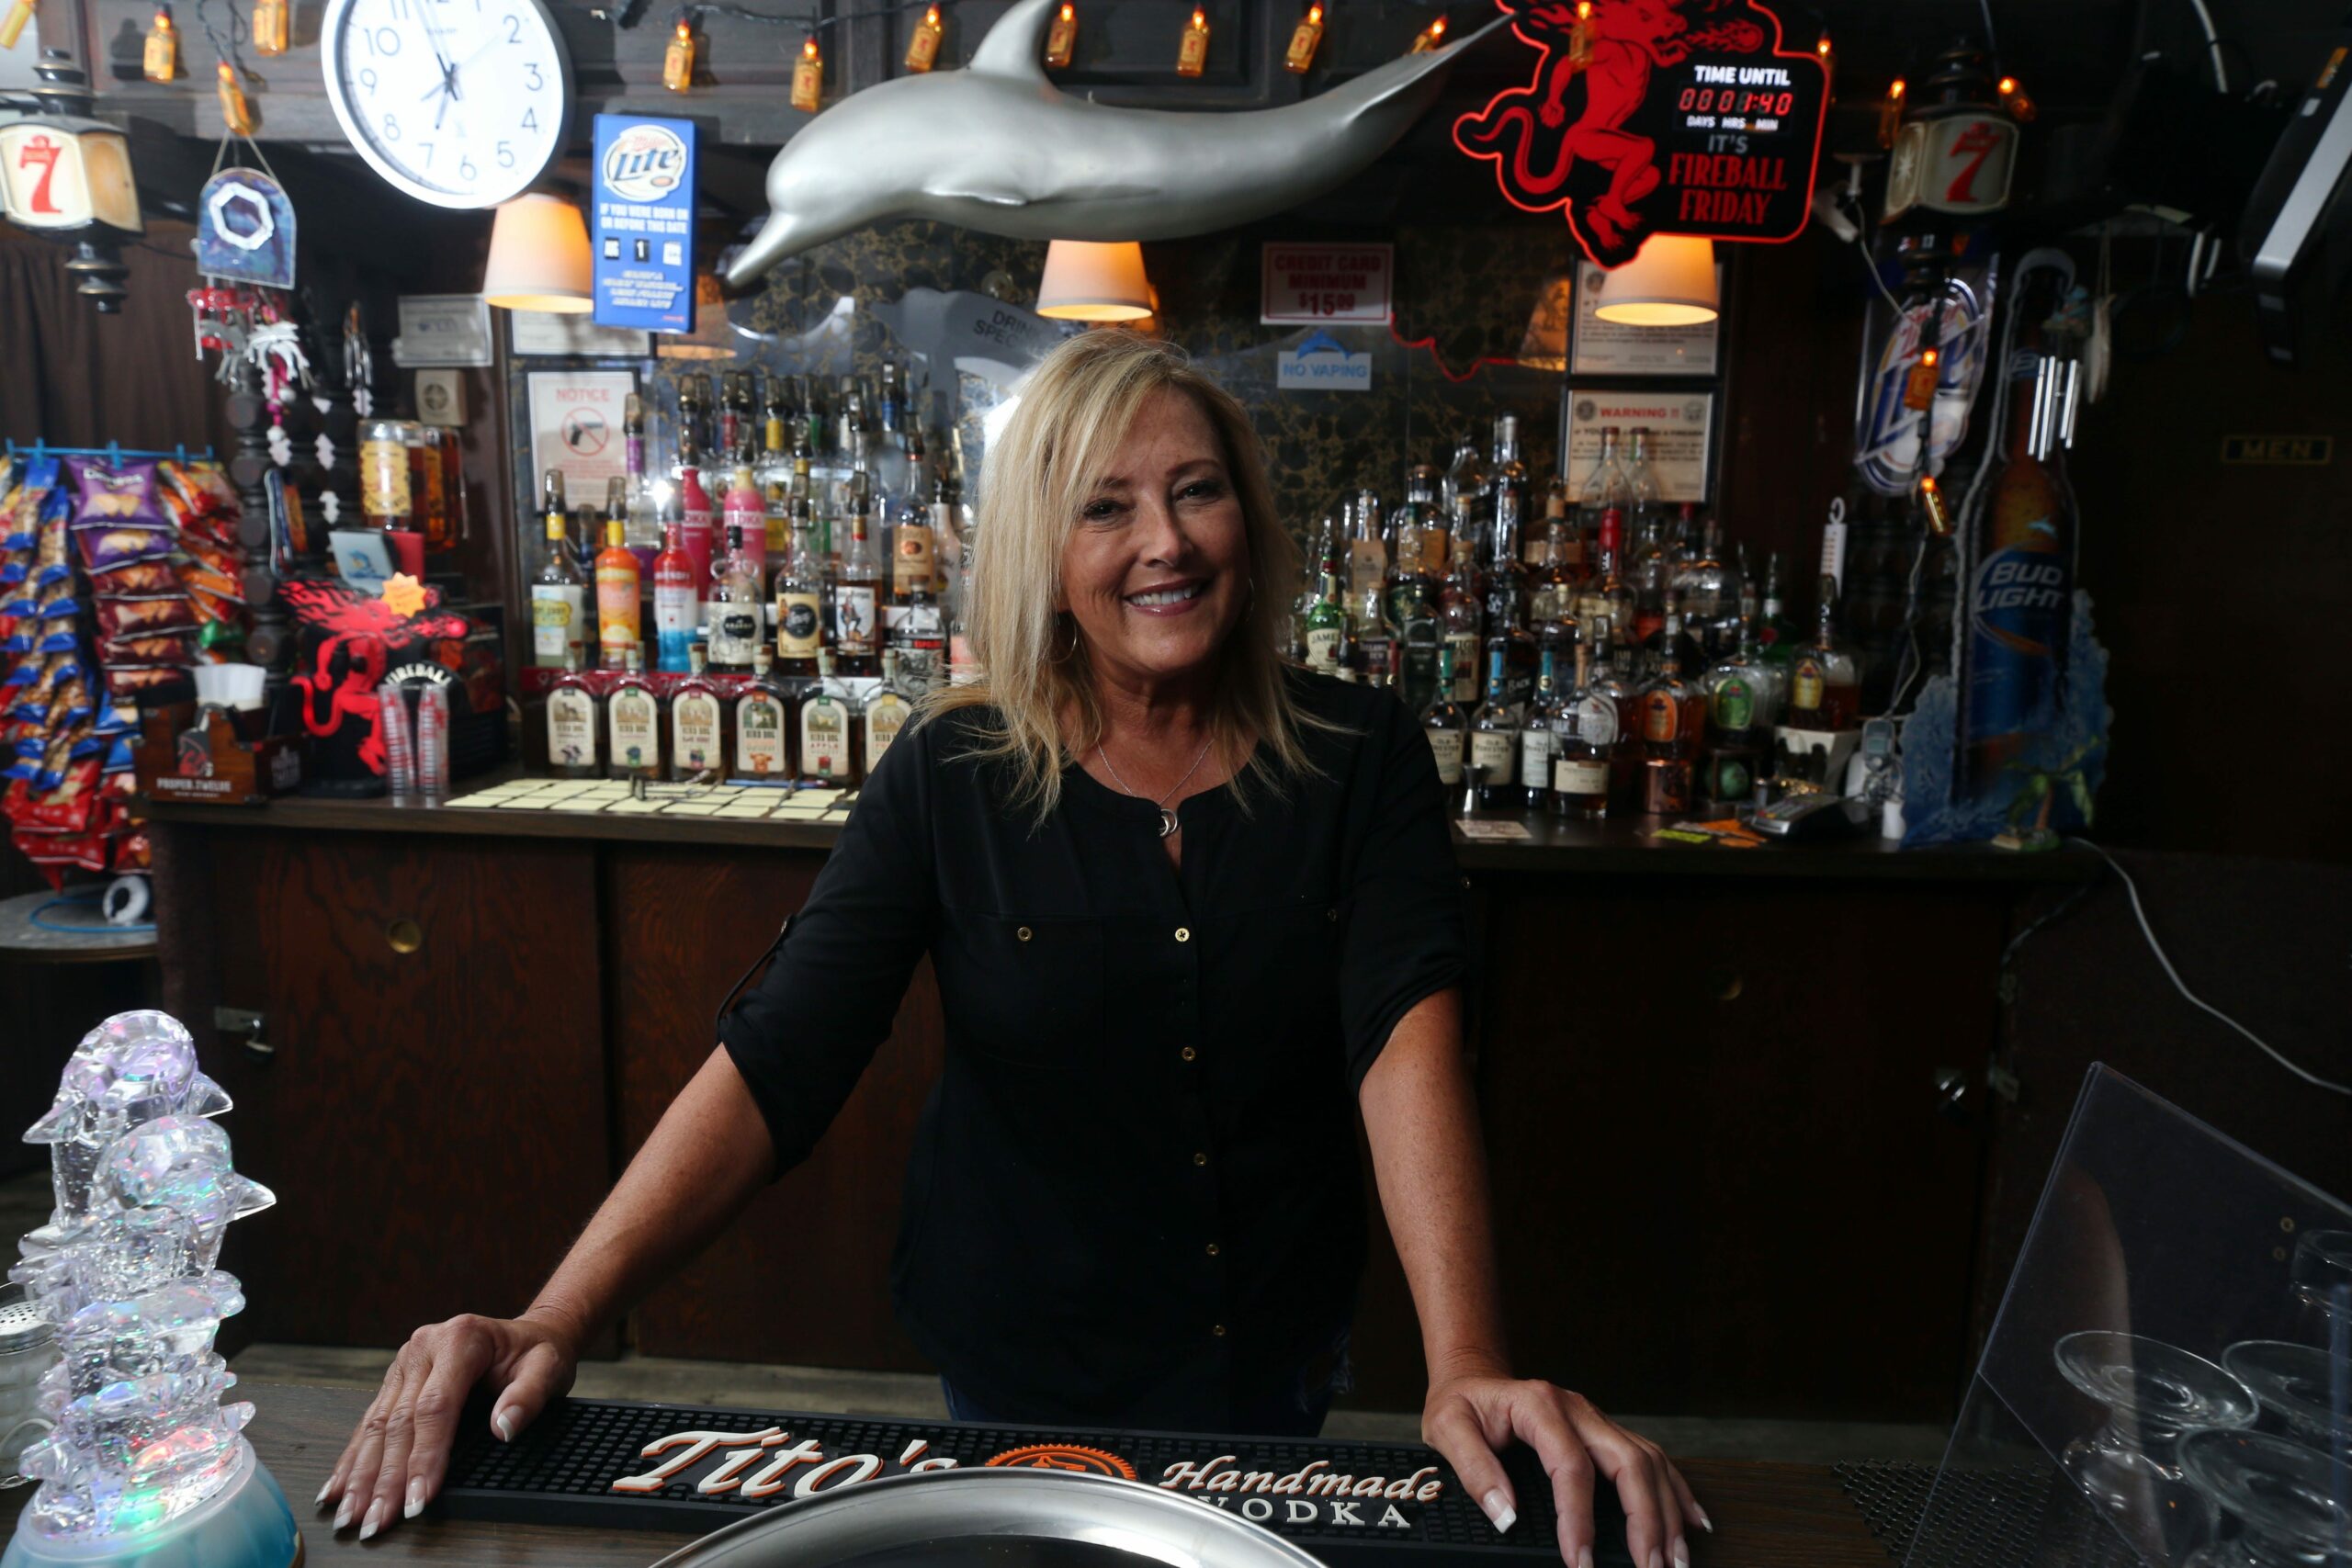 Gahanna's iconic Dolphin Lounge with 50 years of live music